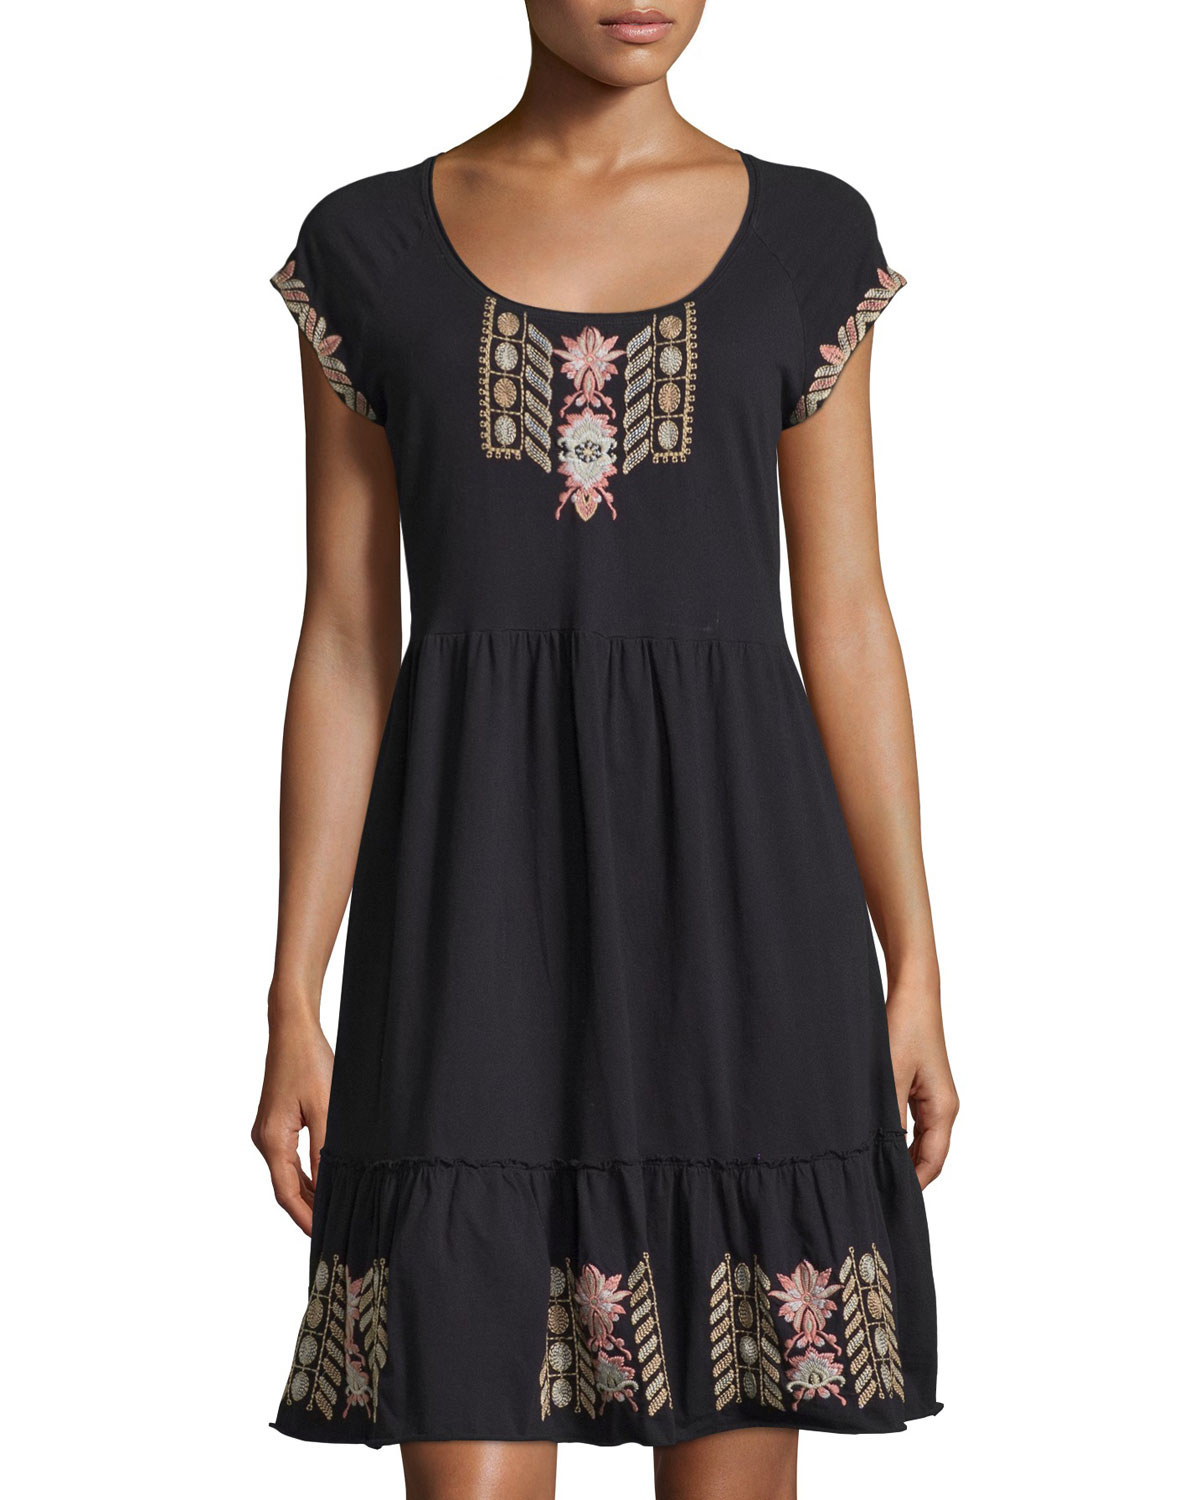 Johnny Was Synthetic Short-sleeve Tiered Embroidered Dress in Black - Lyst